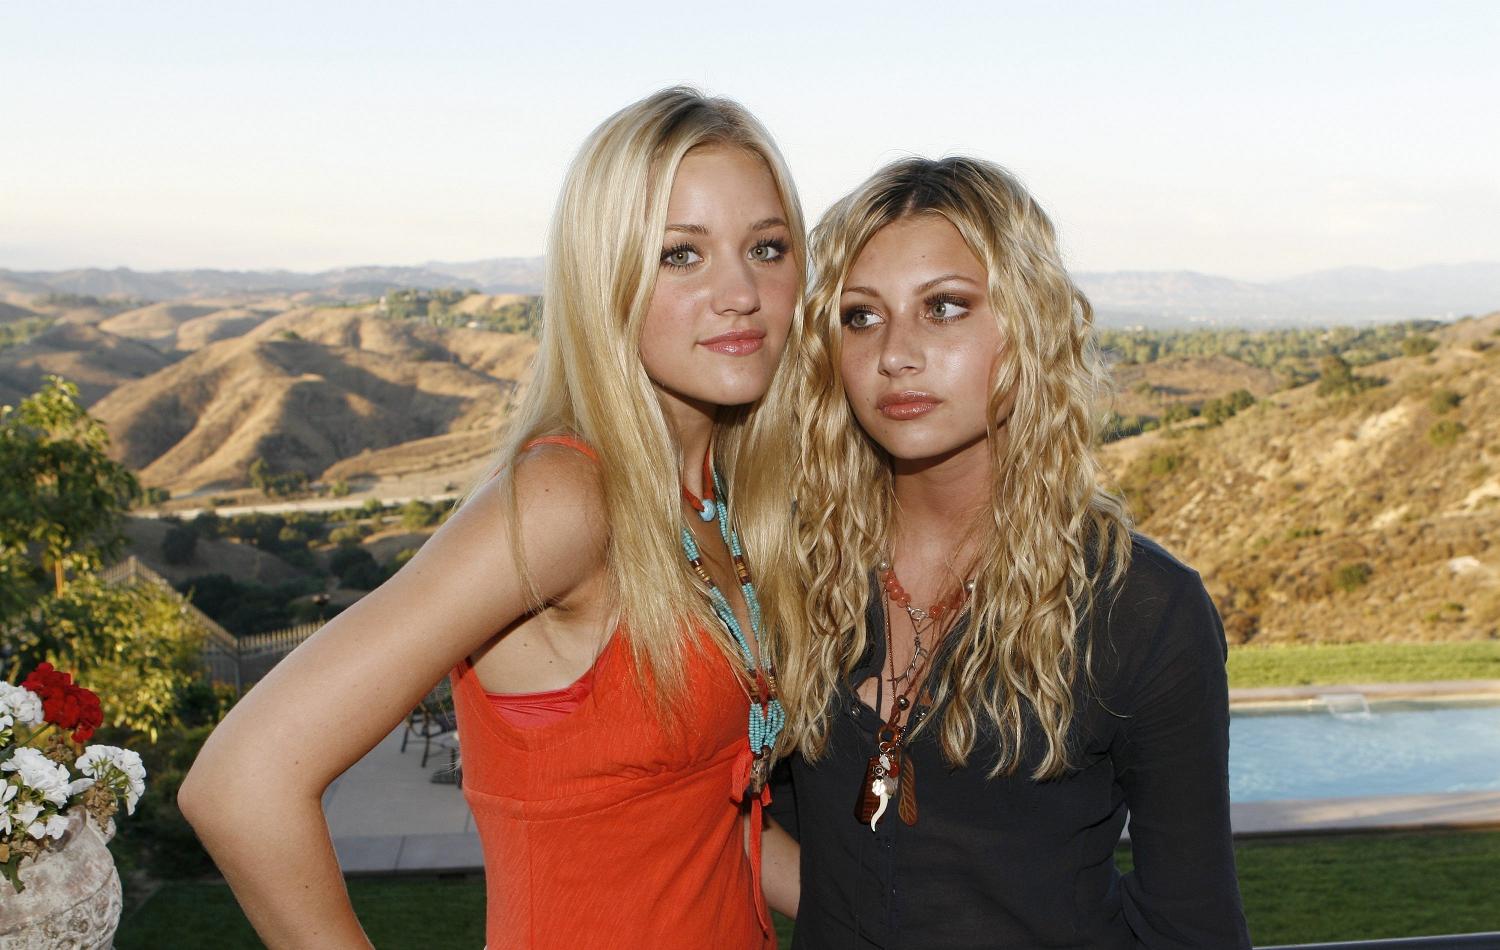 Aly and Aj photo #492821.